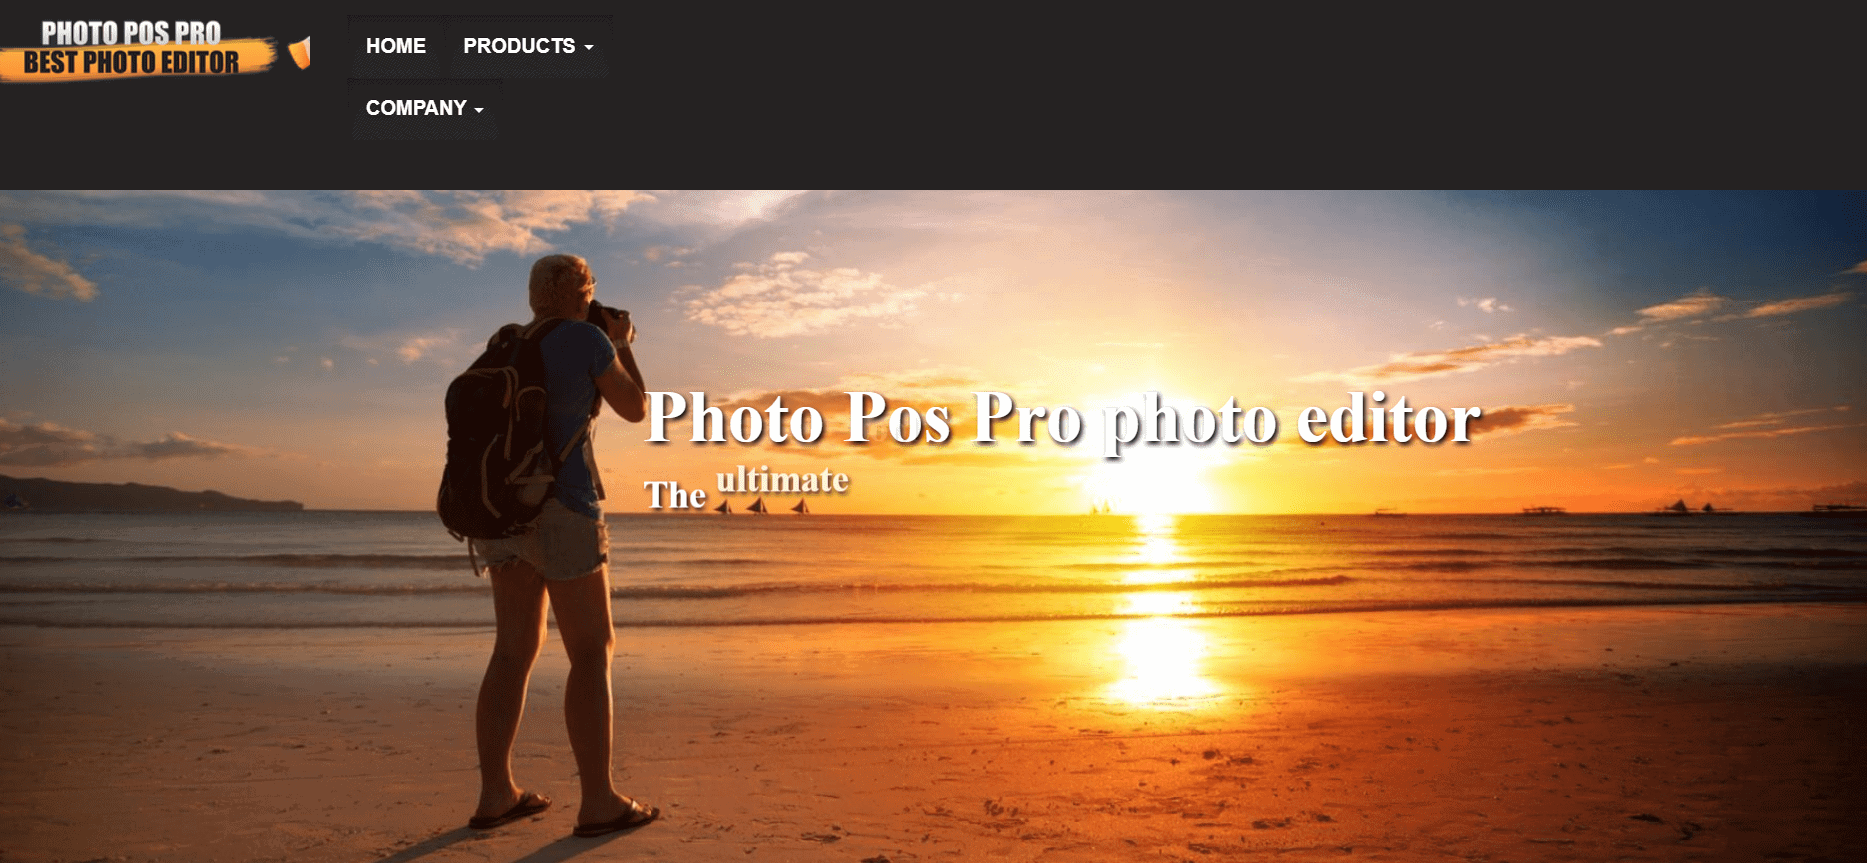 Picture Pos Pro - Free Photo Editing Tools